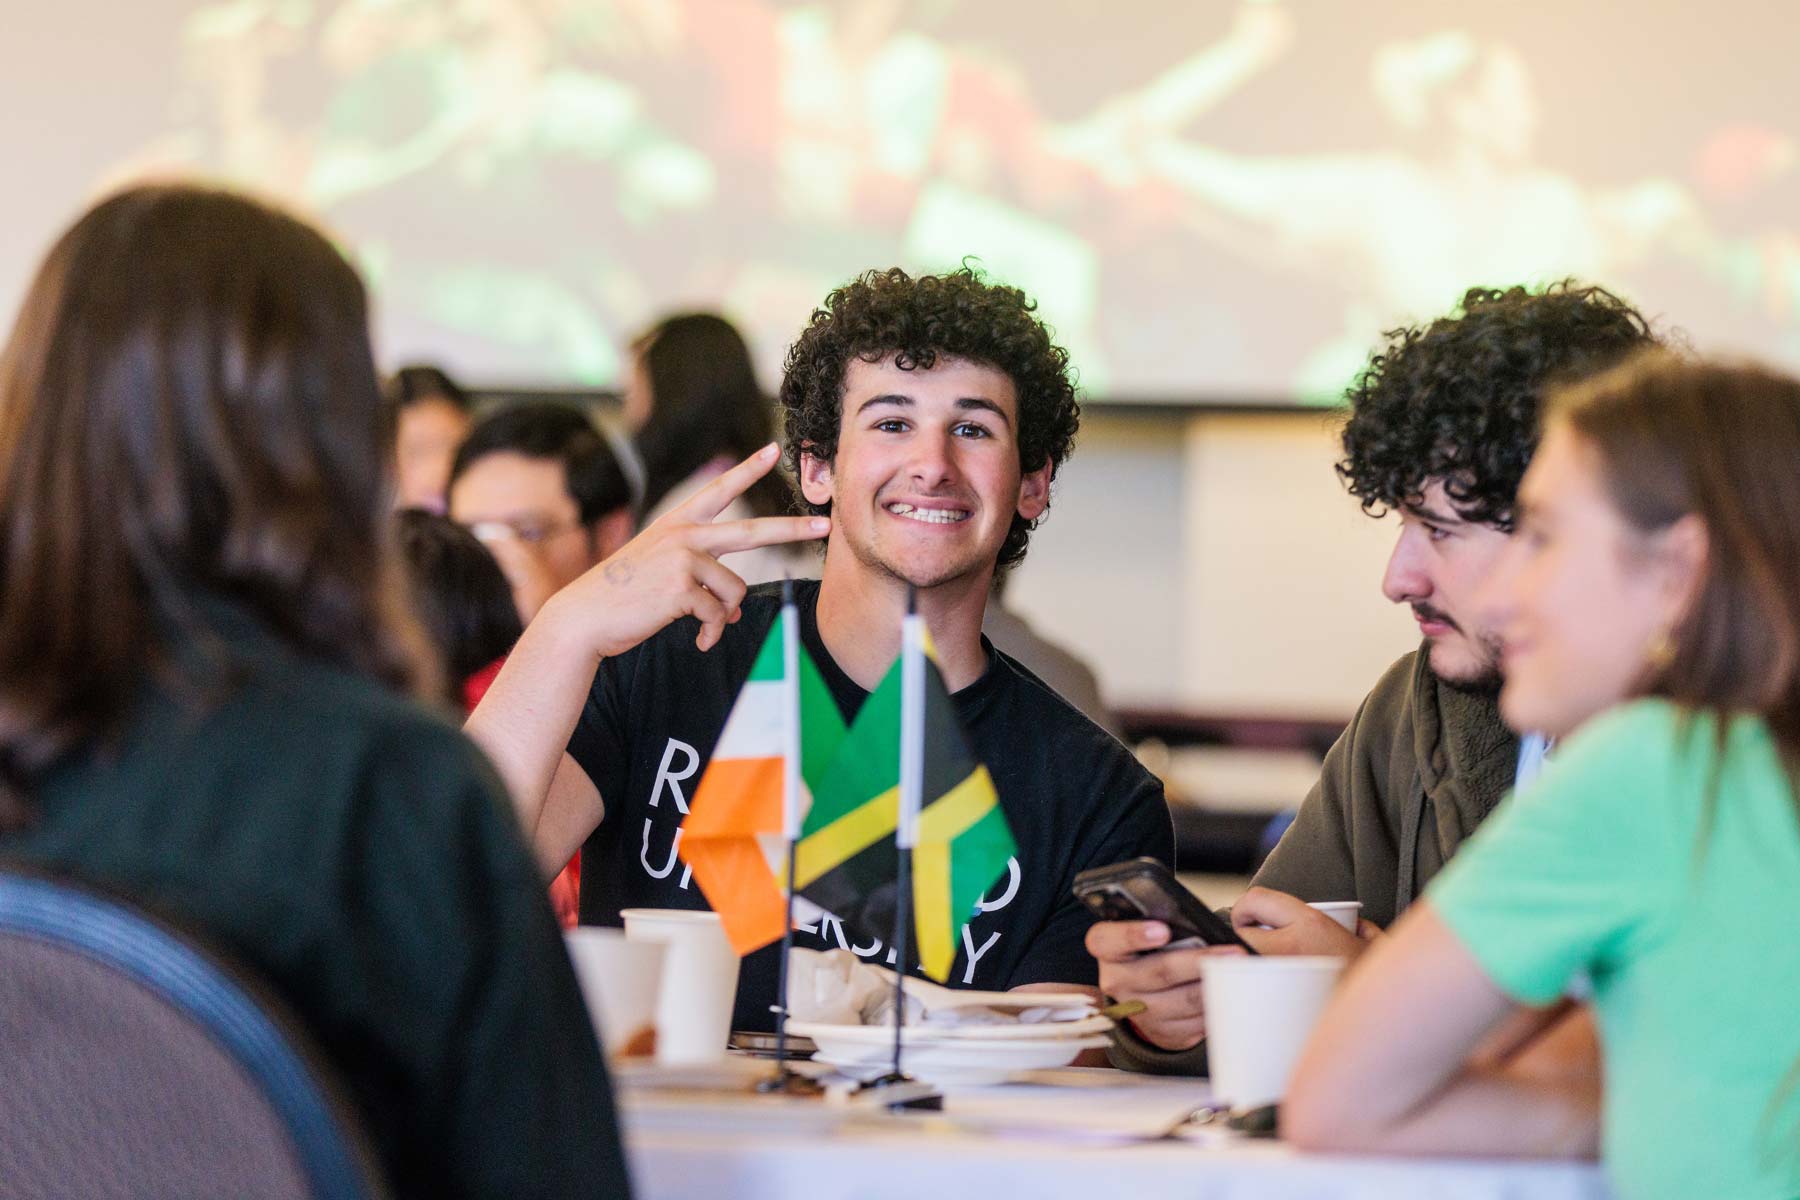 Inernational student smiling during a campus event.